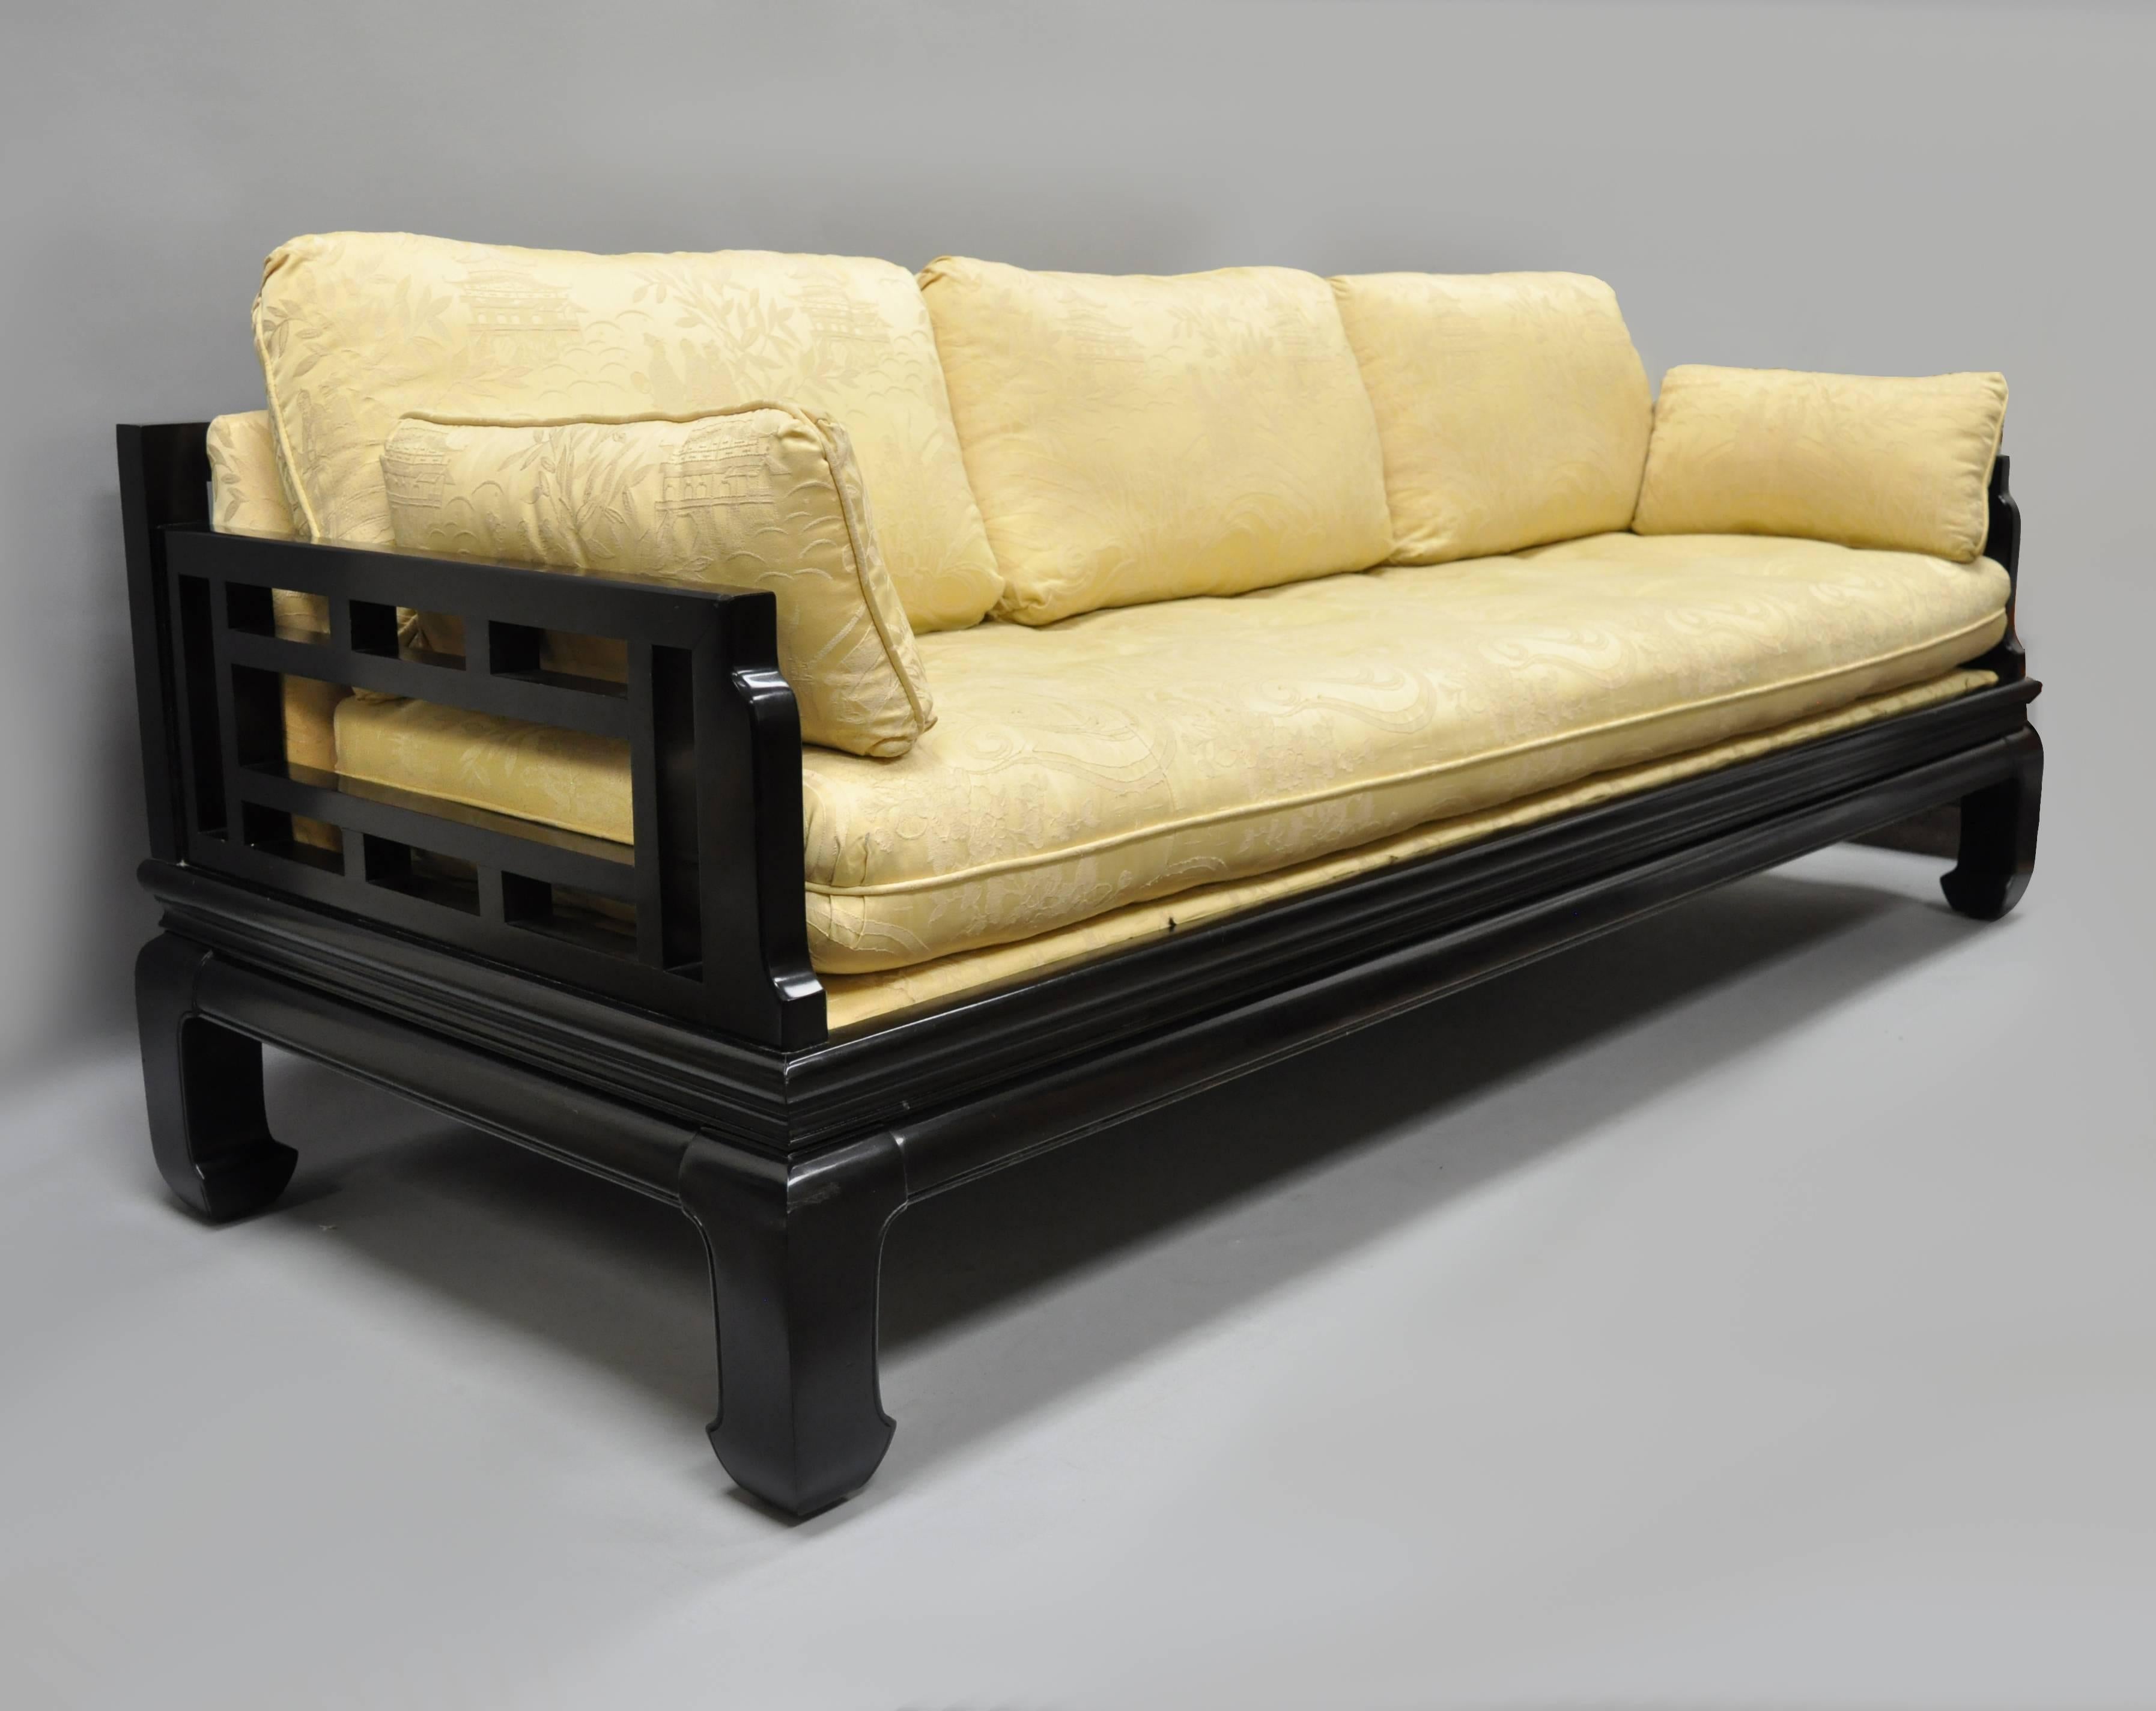 Michael Taylor for Baker ebonized oriental inspired sofa with Lattice Fretwork Back in the James Mont Style. Item features a heavy solid wood frame, fretwork design back and arms, Ming style curved legs, loose cushions, and very impressive form.